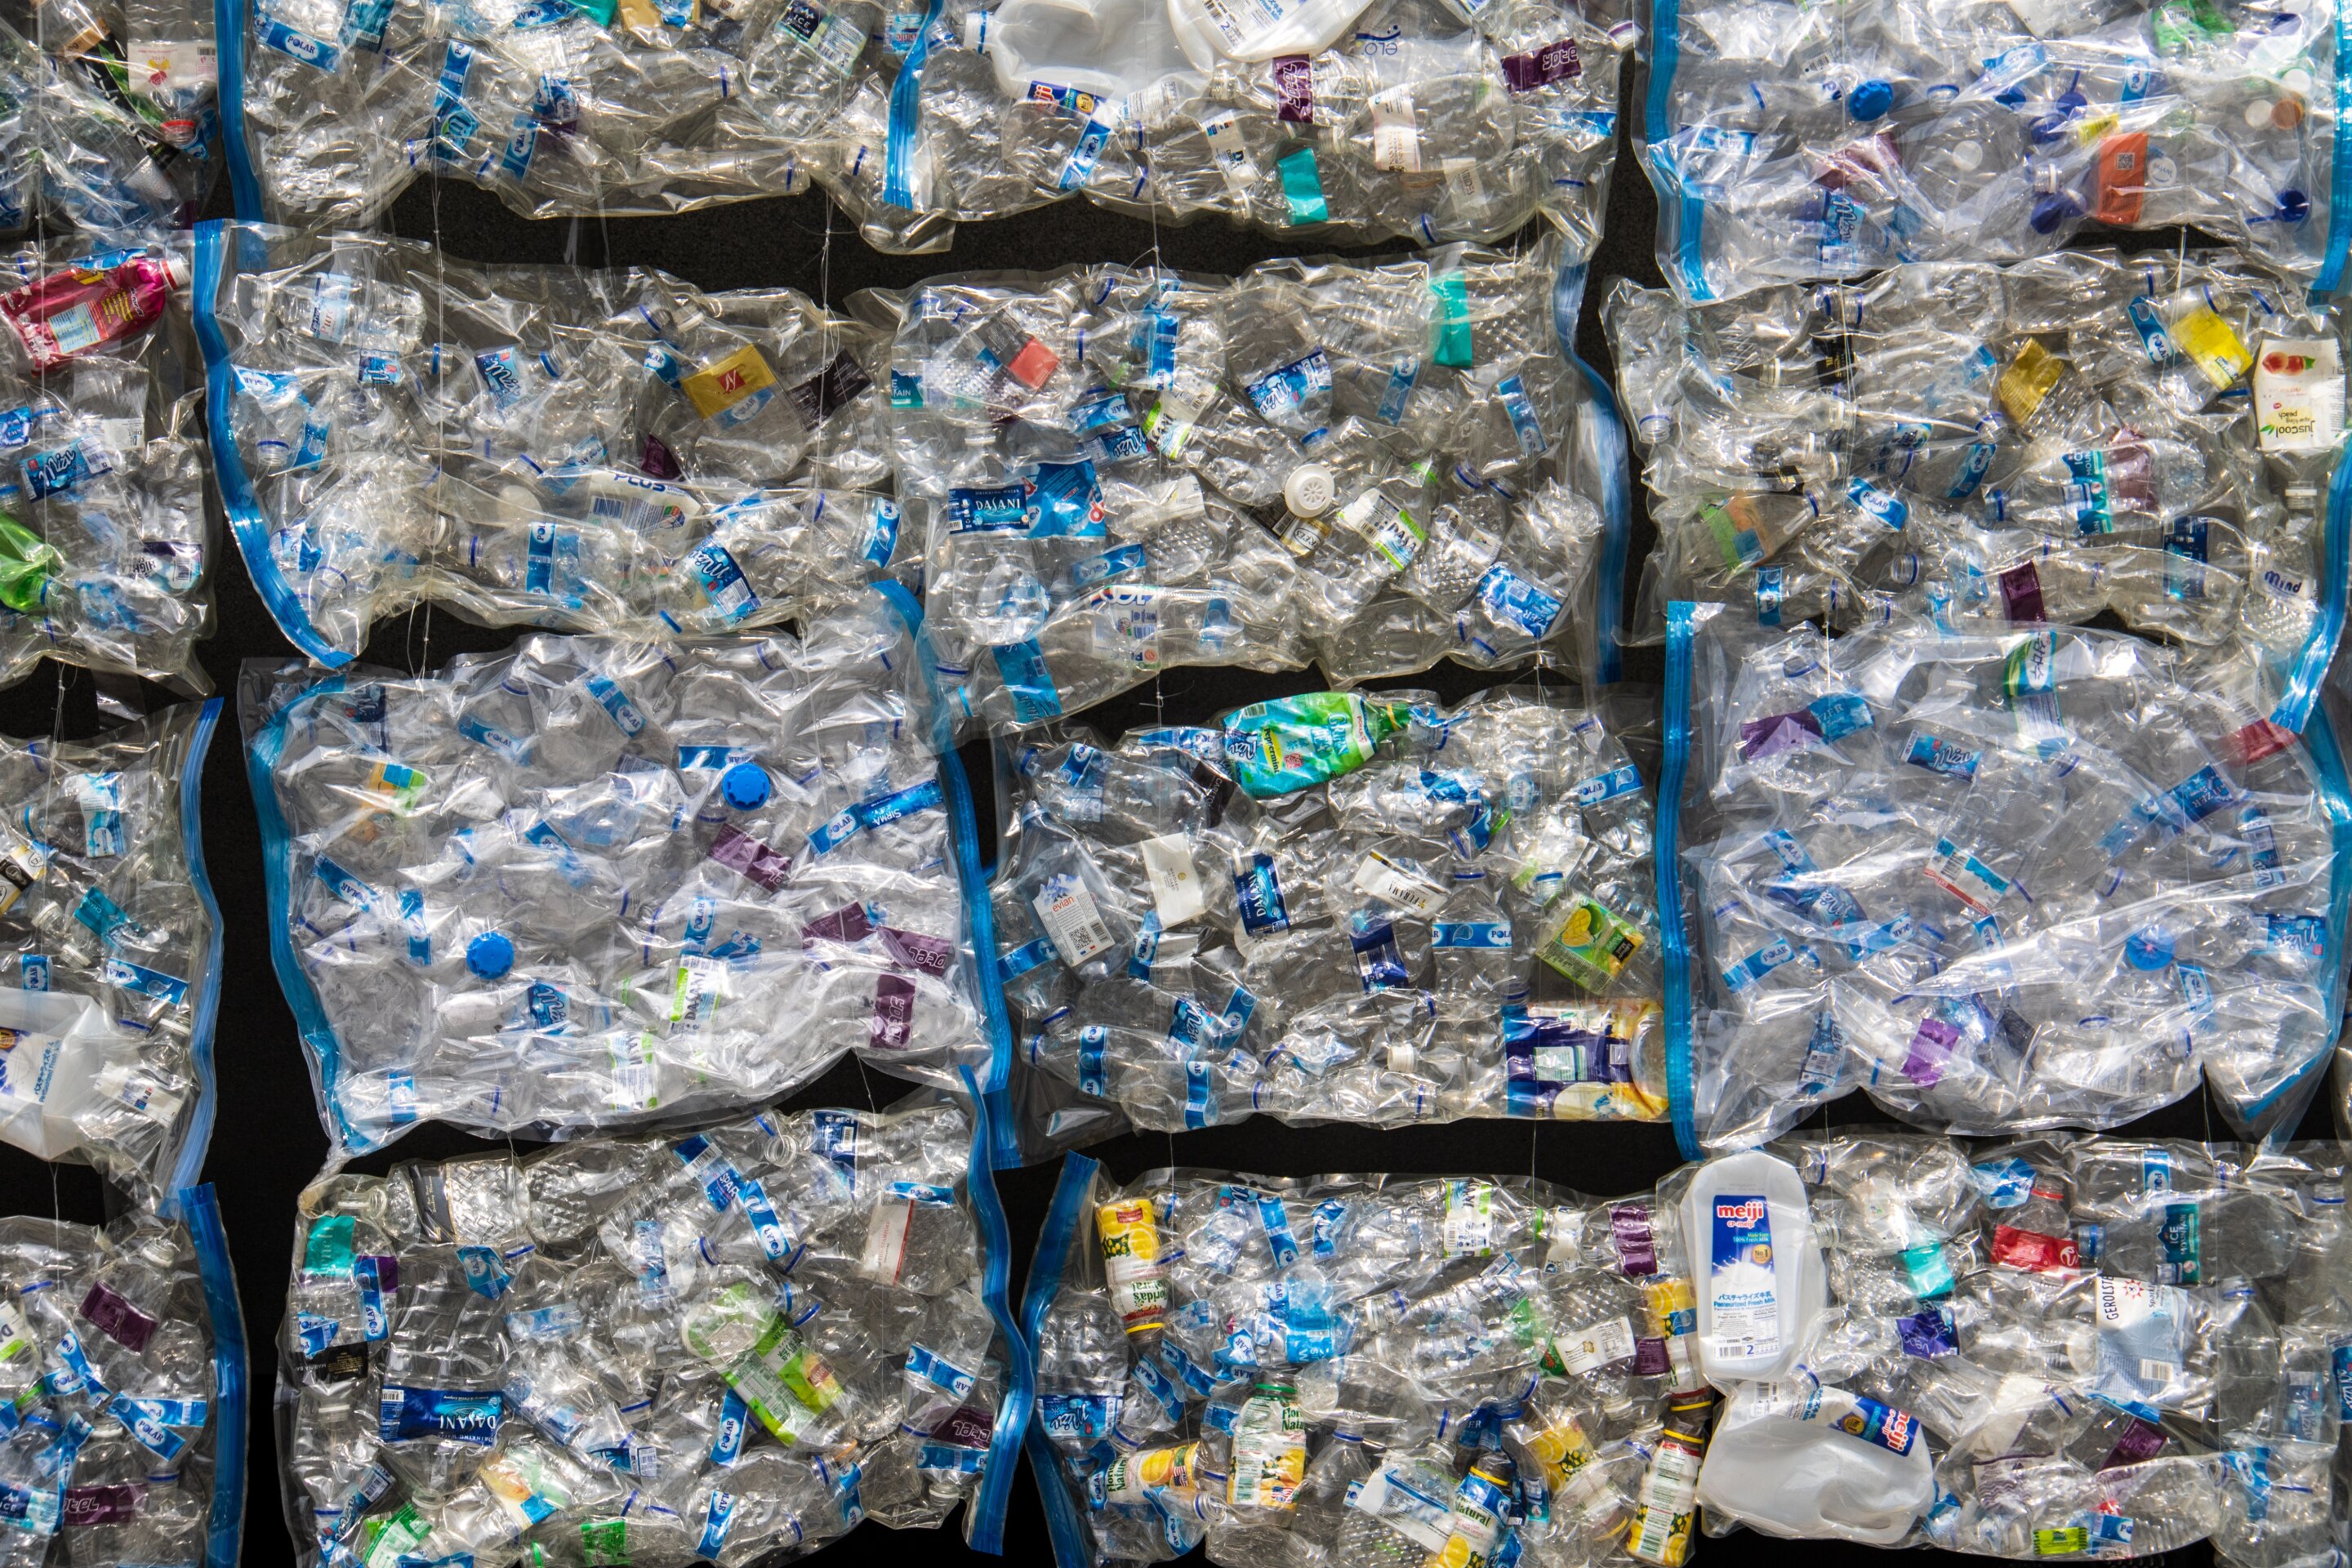 Genetically engineered, plastic-eating bacteria can give waste a